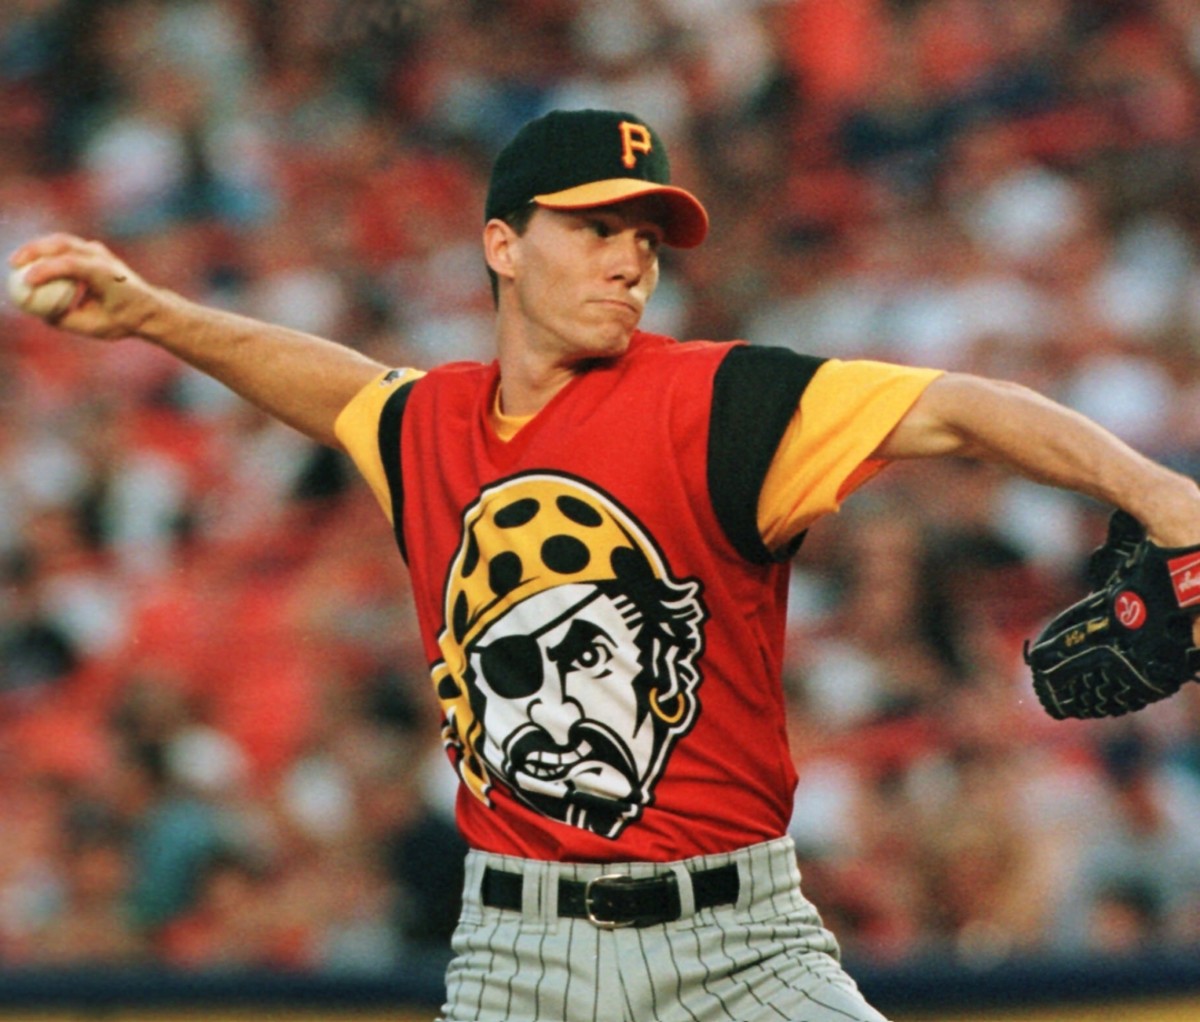 Washington Nationals 'Zimharpanmos' jersey is best of the worst